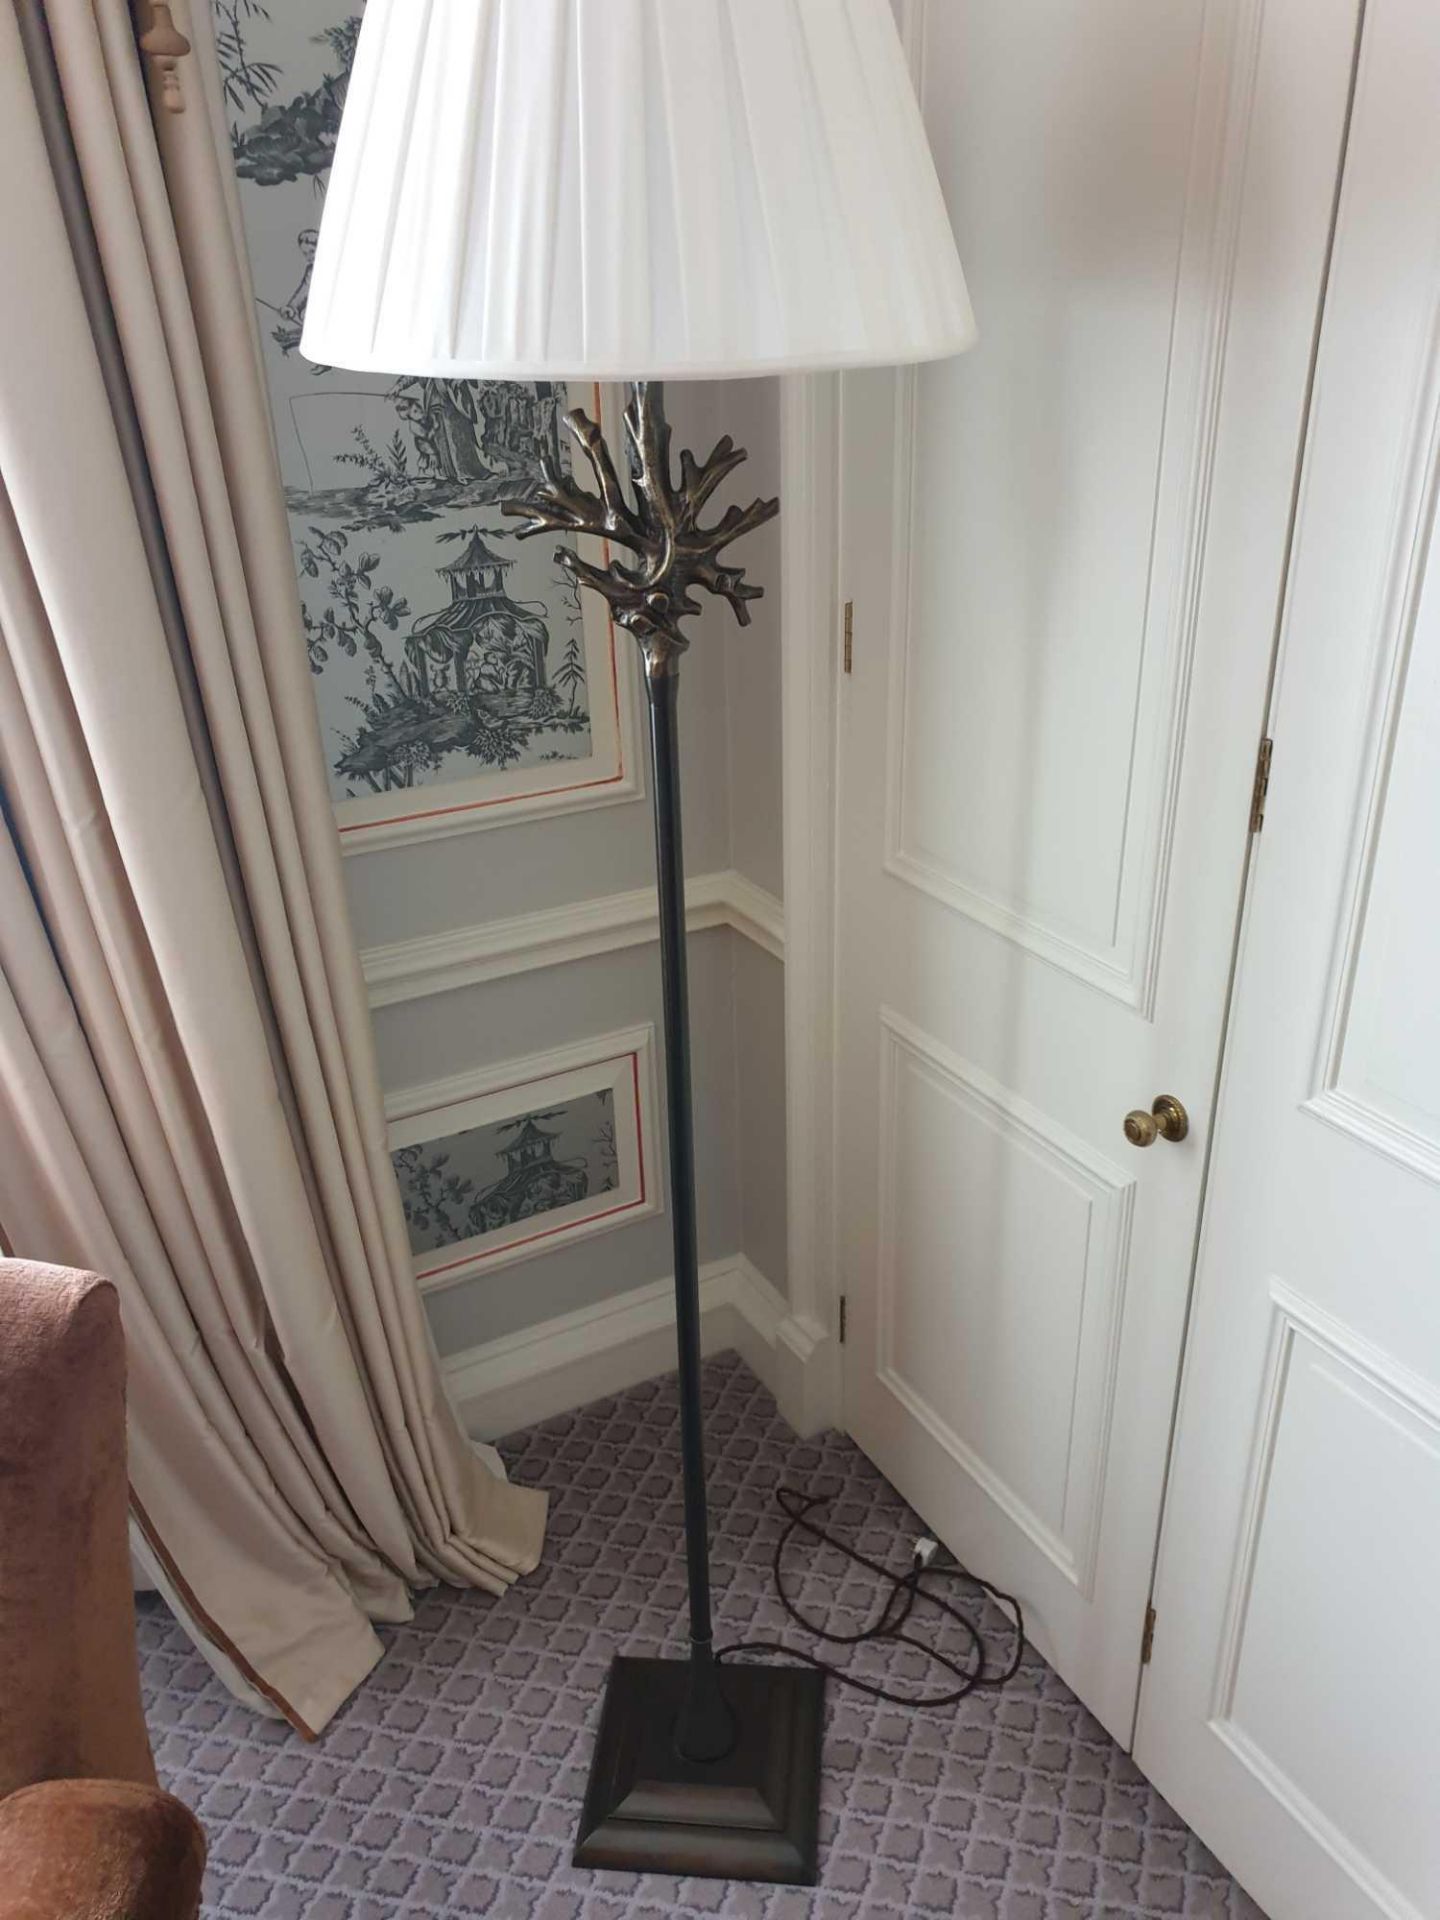 Heathfield And Co Coral Standard Lamp With Linen Shade 180cms (Room 706 707)